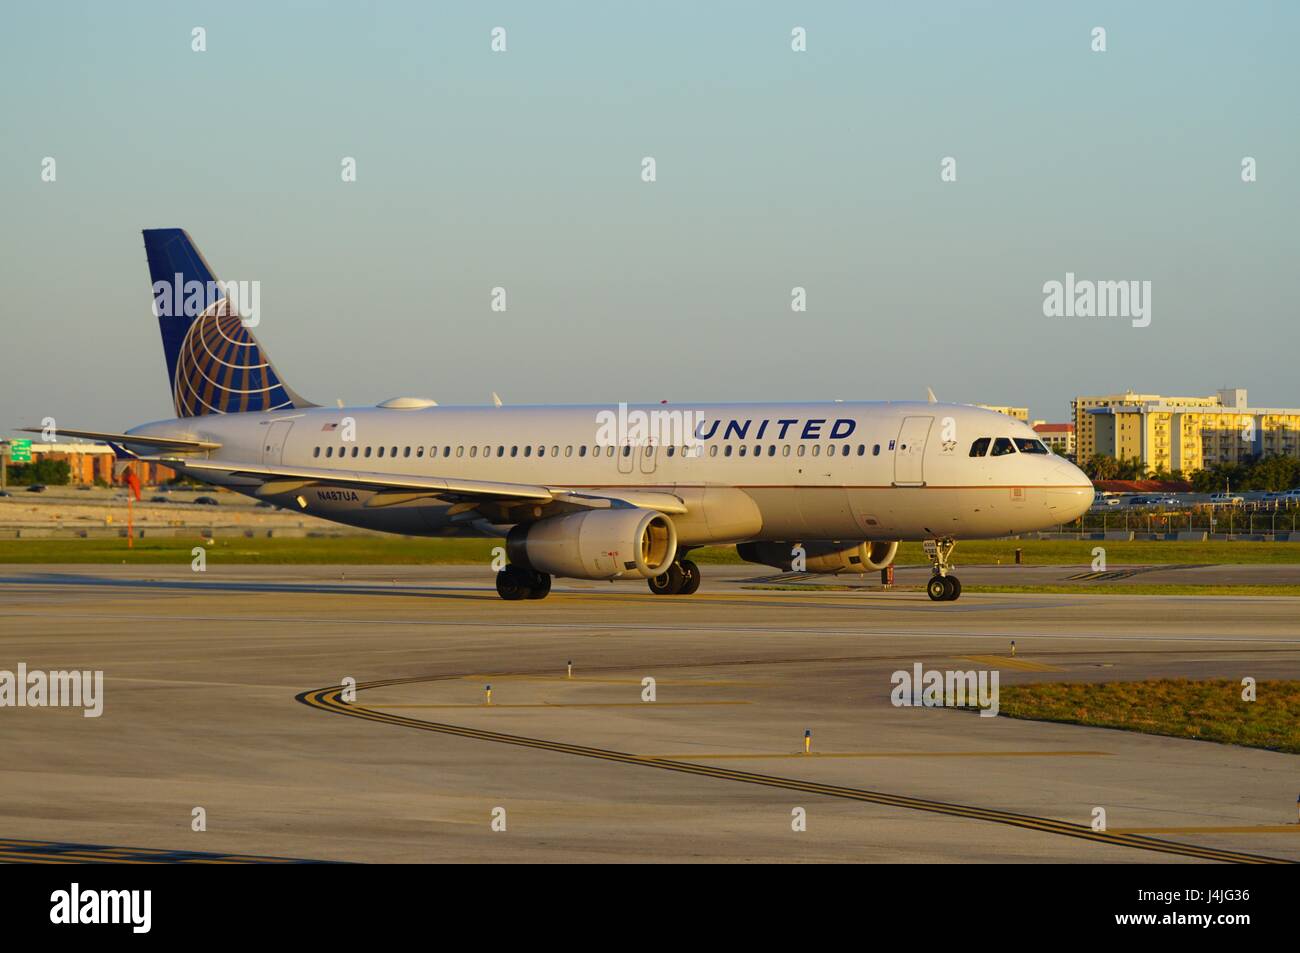 A United Airlines (UA) airplane at the Miami International Airport (MIA) Stock Photo